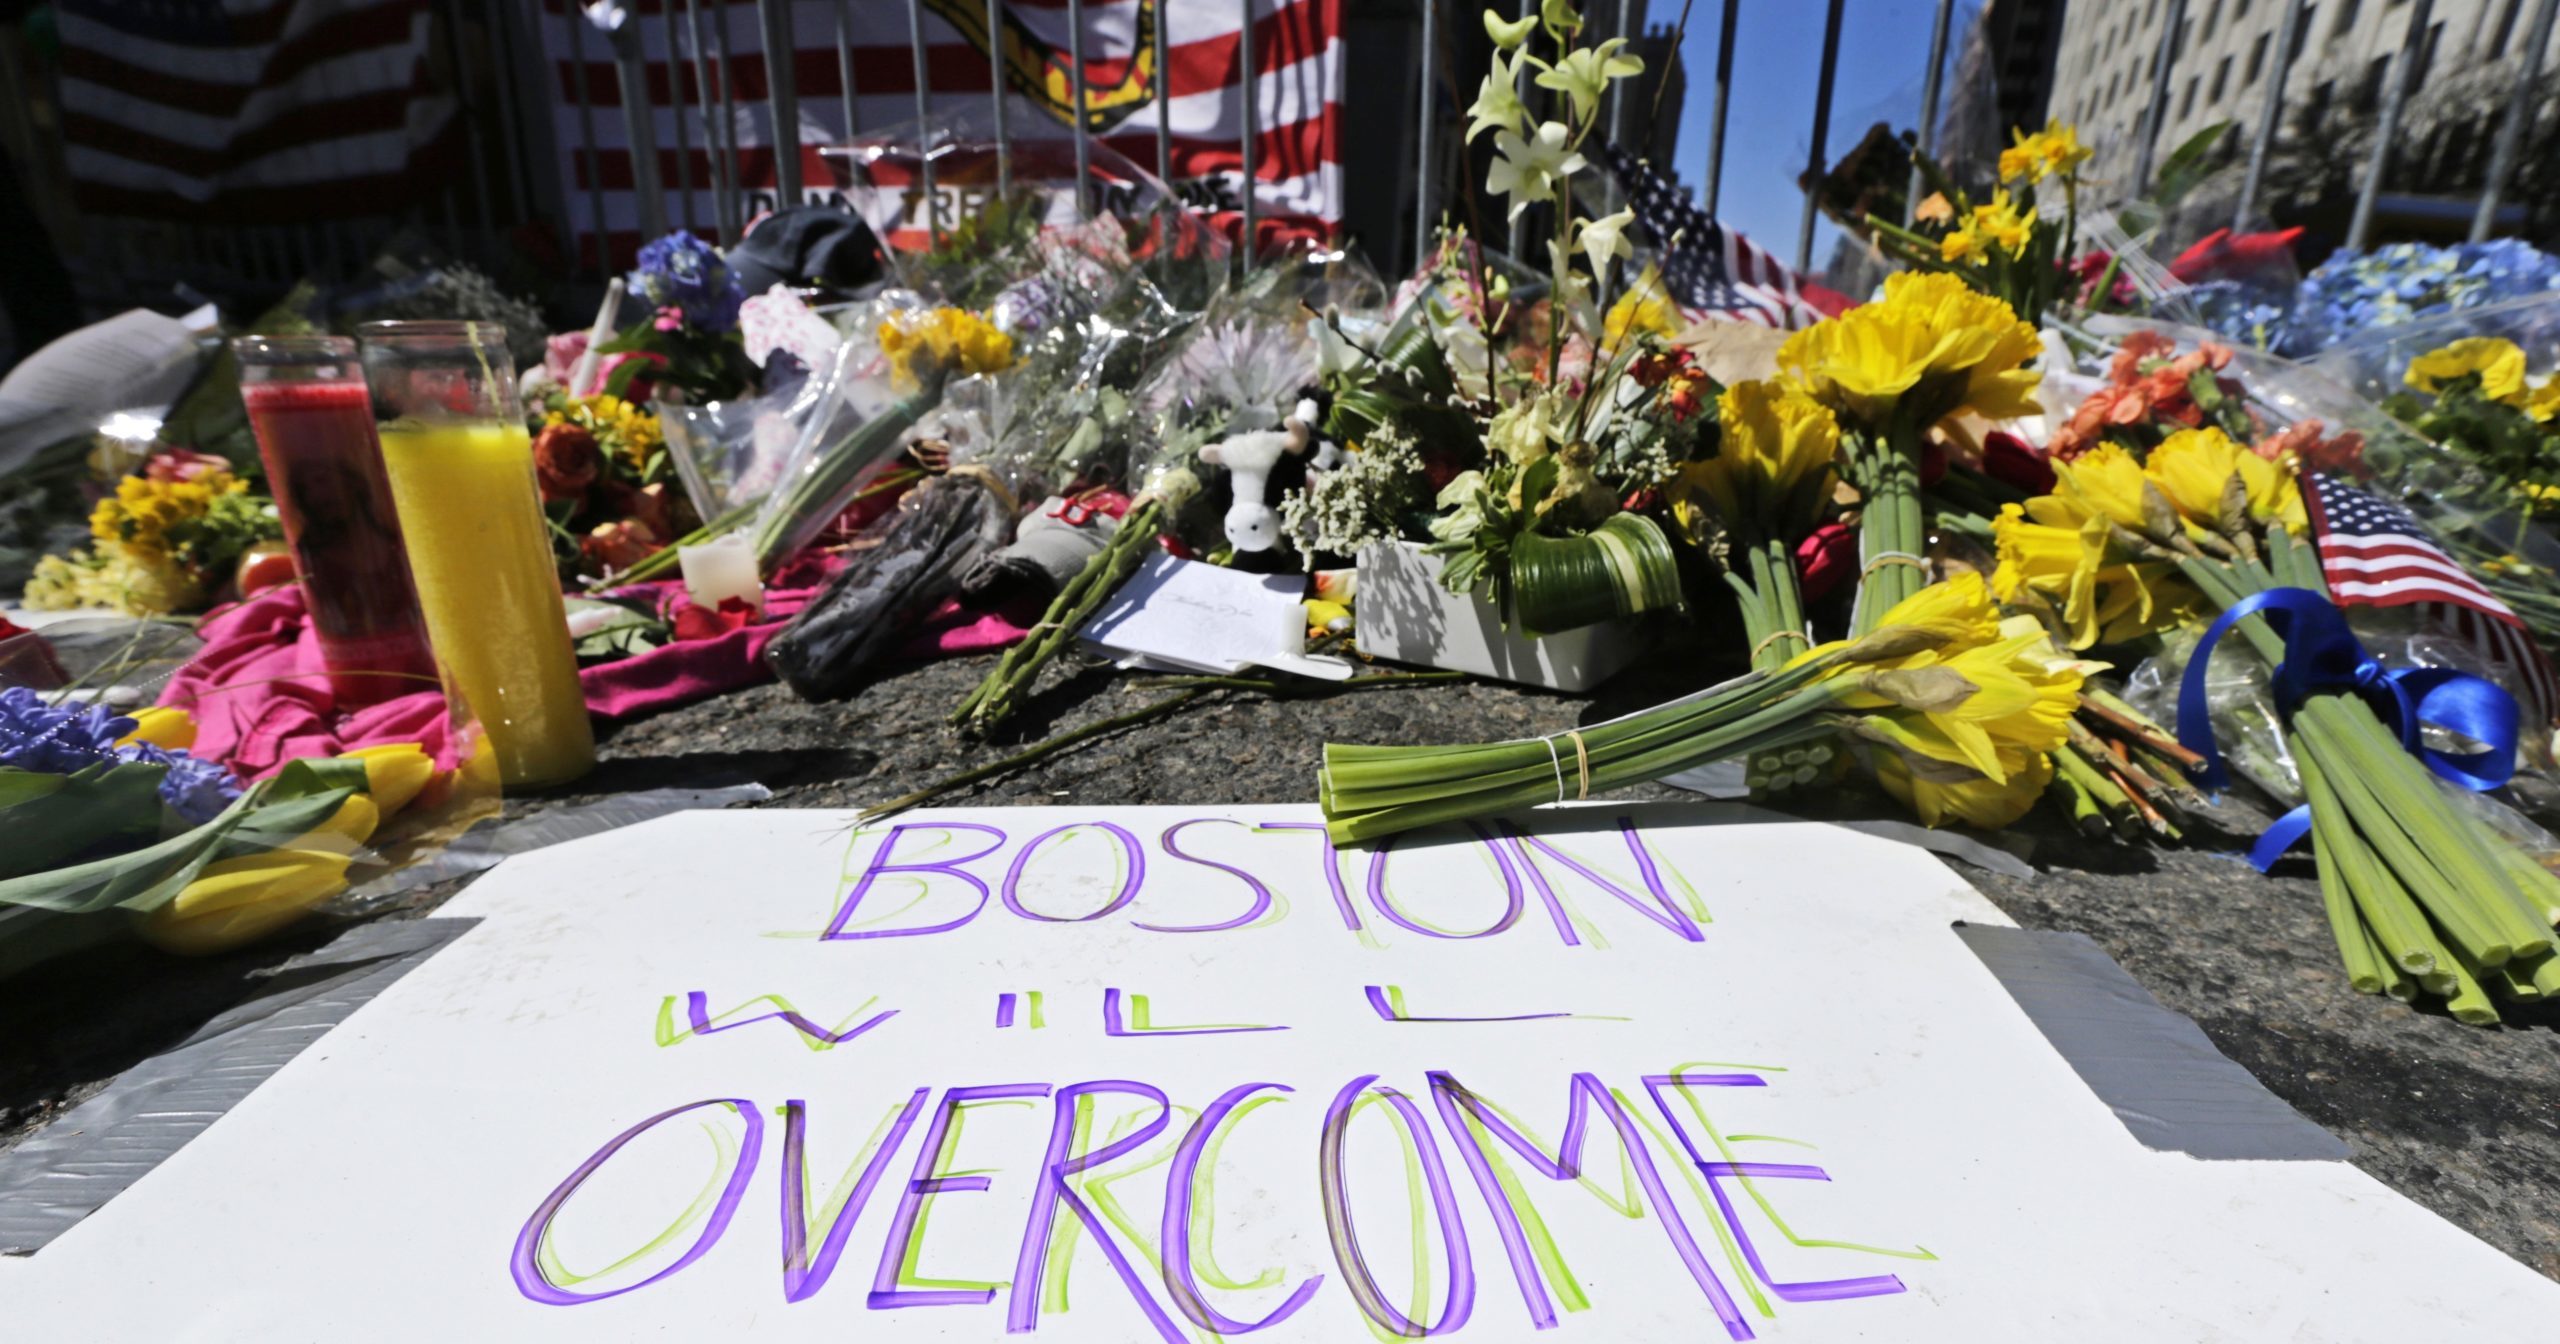 In this April 17, 2013, photograph, flowers and signs adorn a makeshift memorial two days after two explosions killed three and injured hundreds near the of finish line of the Boston Marathon. A federal appeals court overturned the death sentence of Dzhokhar Tsarnaev in the 2013 bombing on July 31, 2020, saying the judge who oversaw the case didn't adequately screen jurors for potential biases.